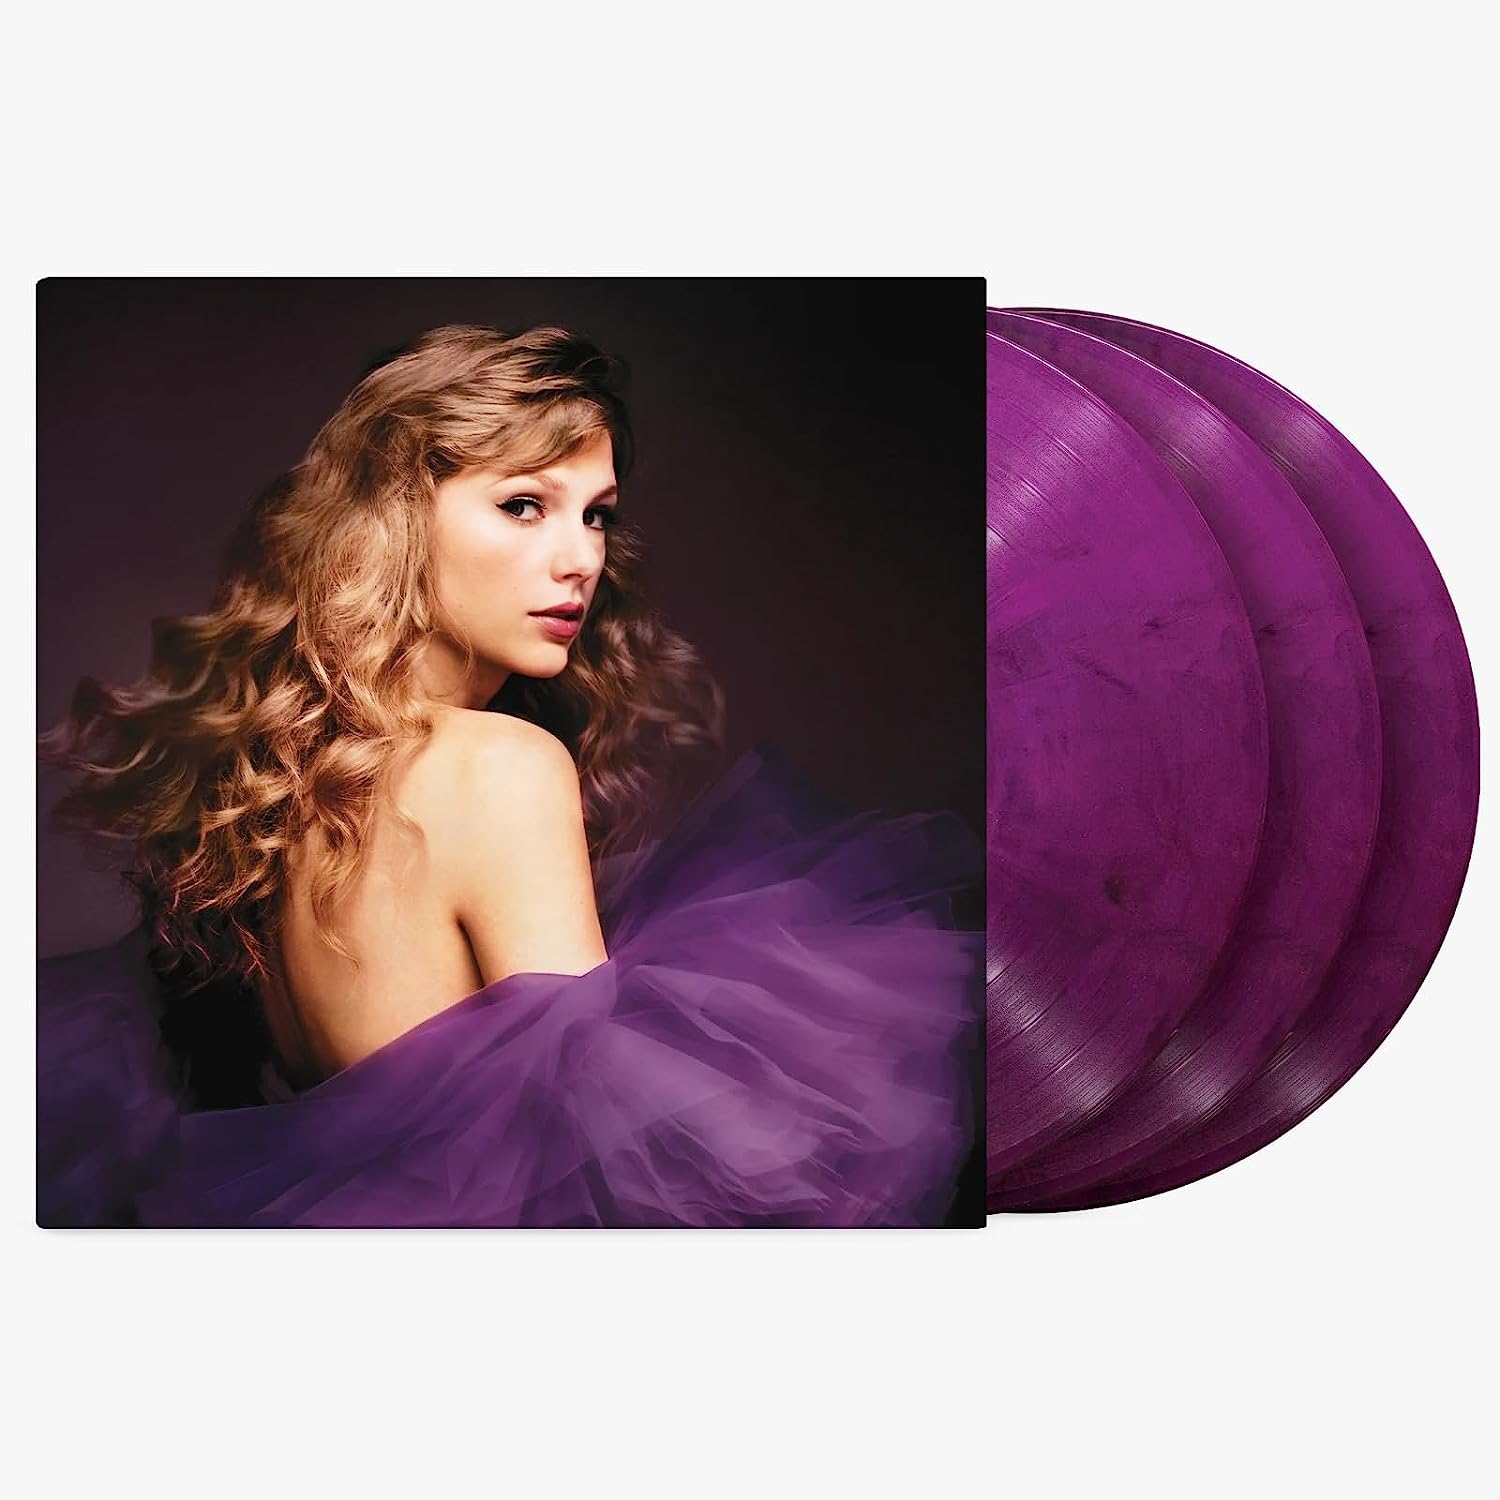 Speak Now (Taylor's Version) stays Timeless and enchanting - The Cypress